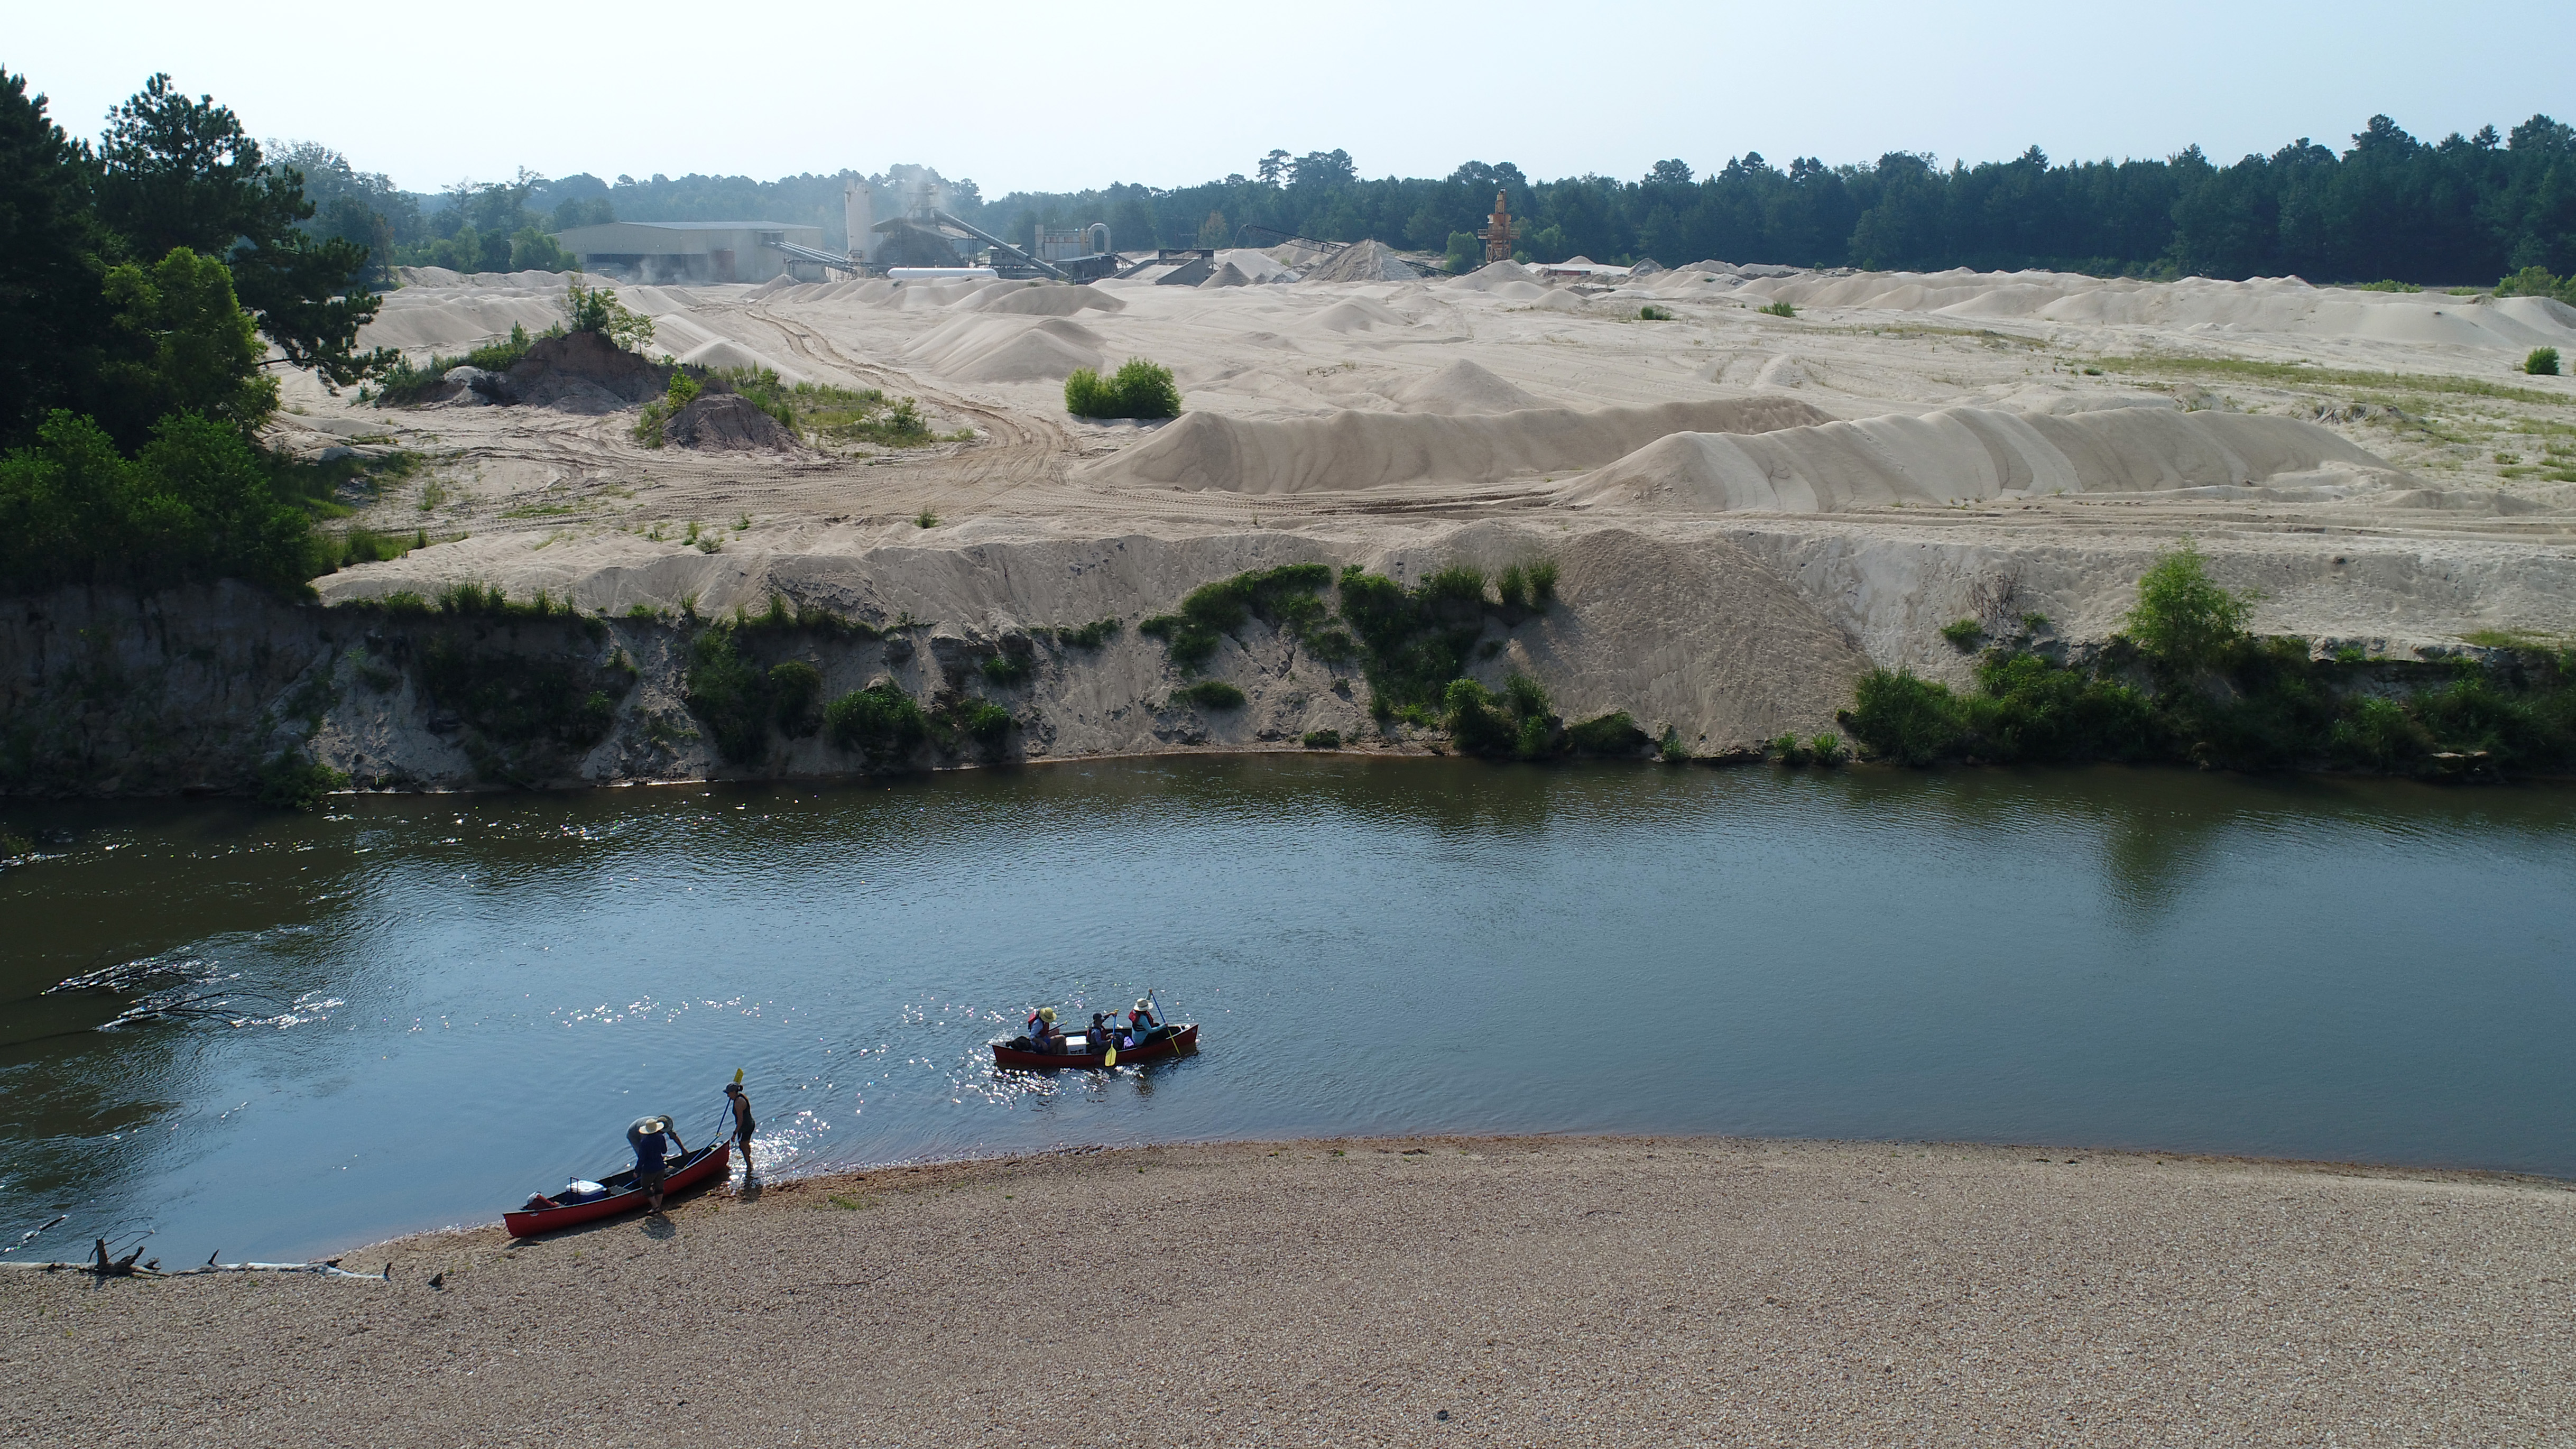 Drone Survey of a Sand & Gravel Mine on the Amite River